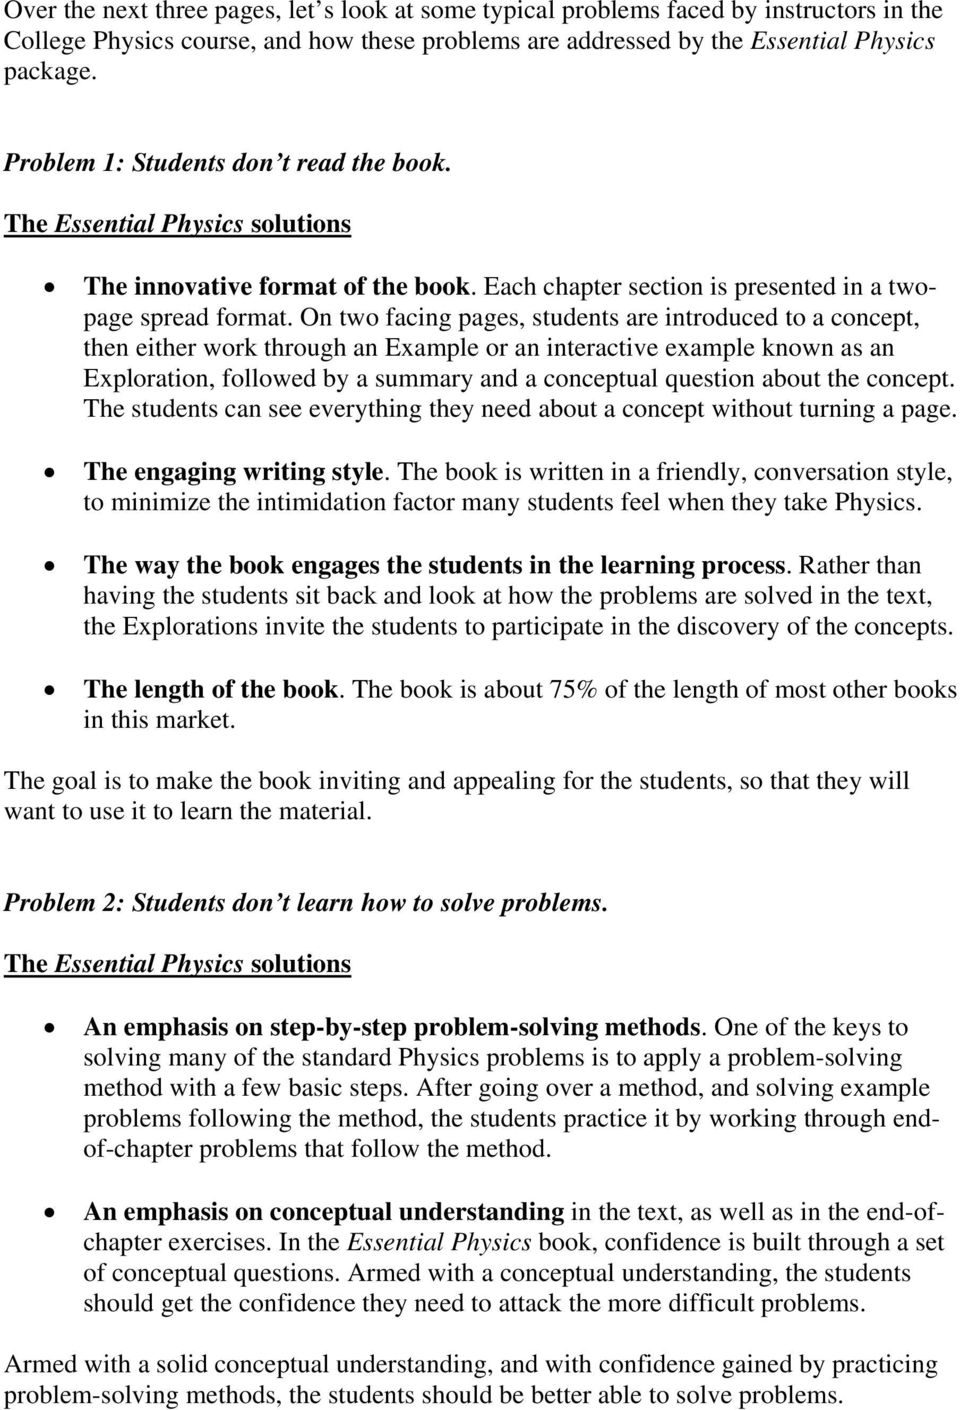 On two facing pages, students are introduced to a concept, then either work through an Example or an interactive example known as an Exploration, followed by a summary and a conceptual question about